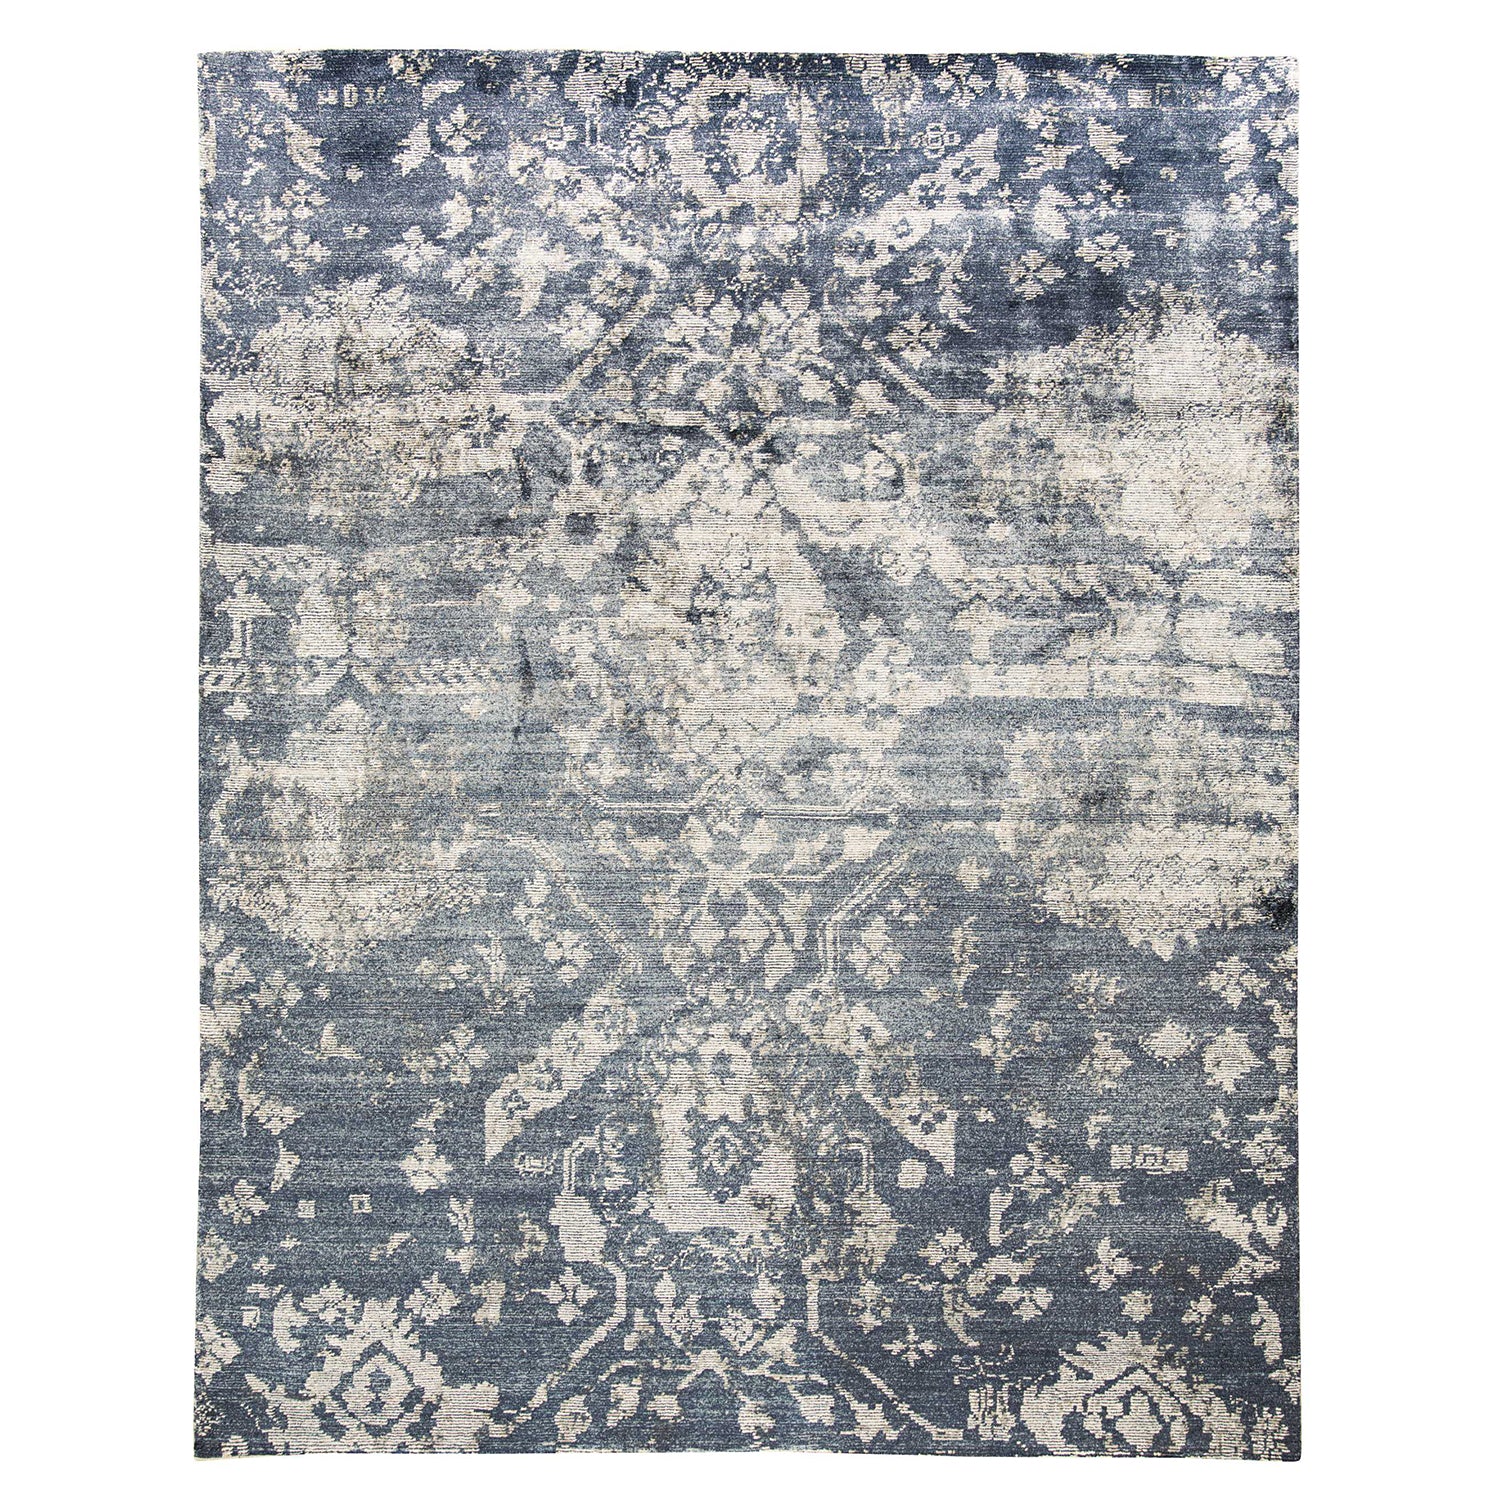 Vintage-style area rug with distressed blue and gray floral design.